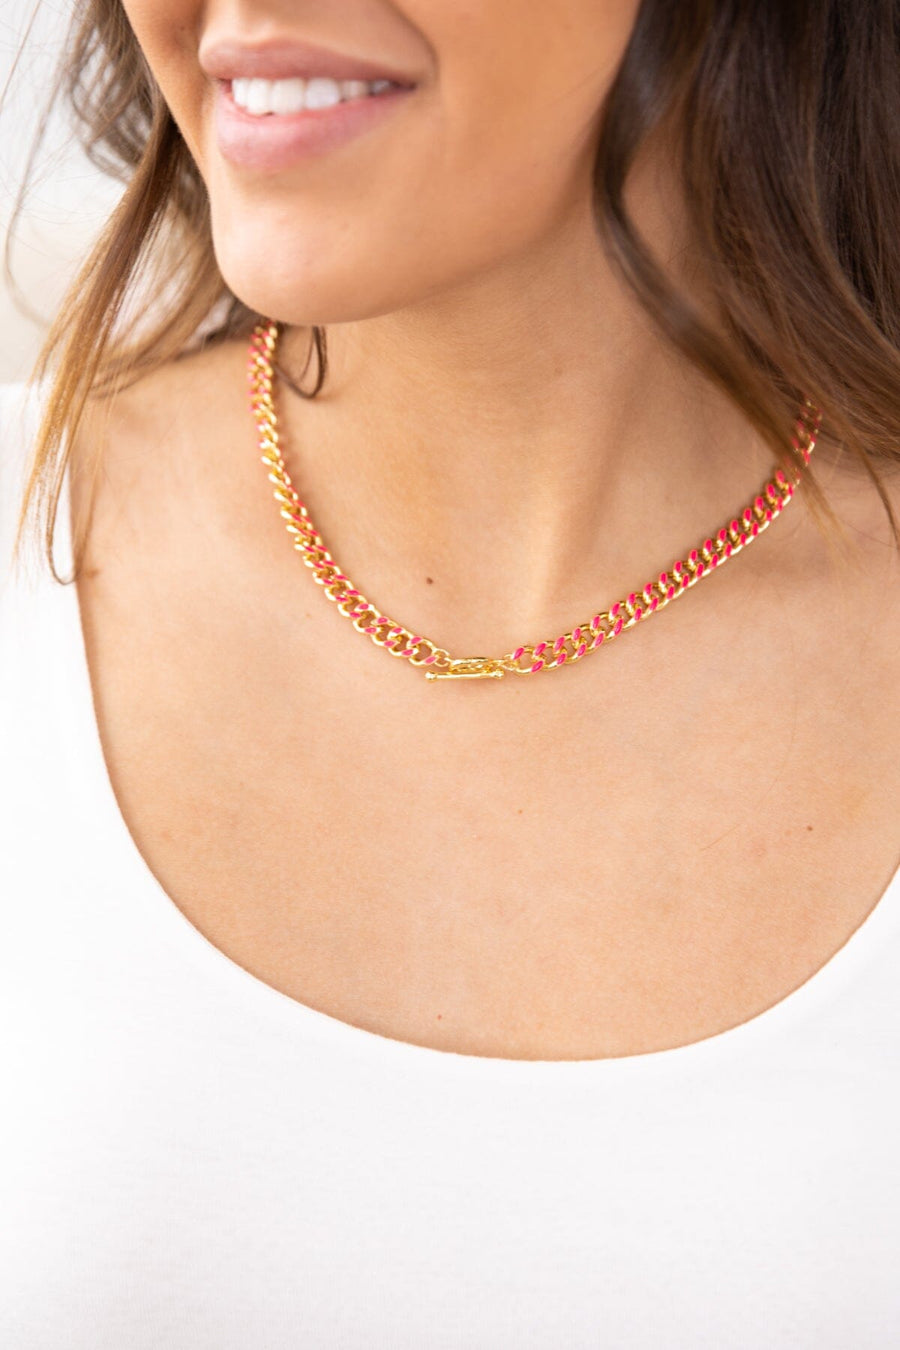 Hot Pink and Gold Enamel Thick Chain Necklace - Filly Flair